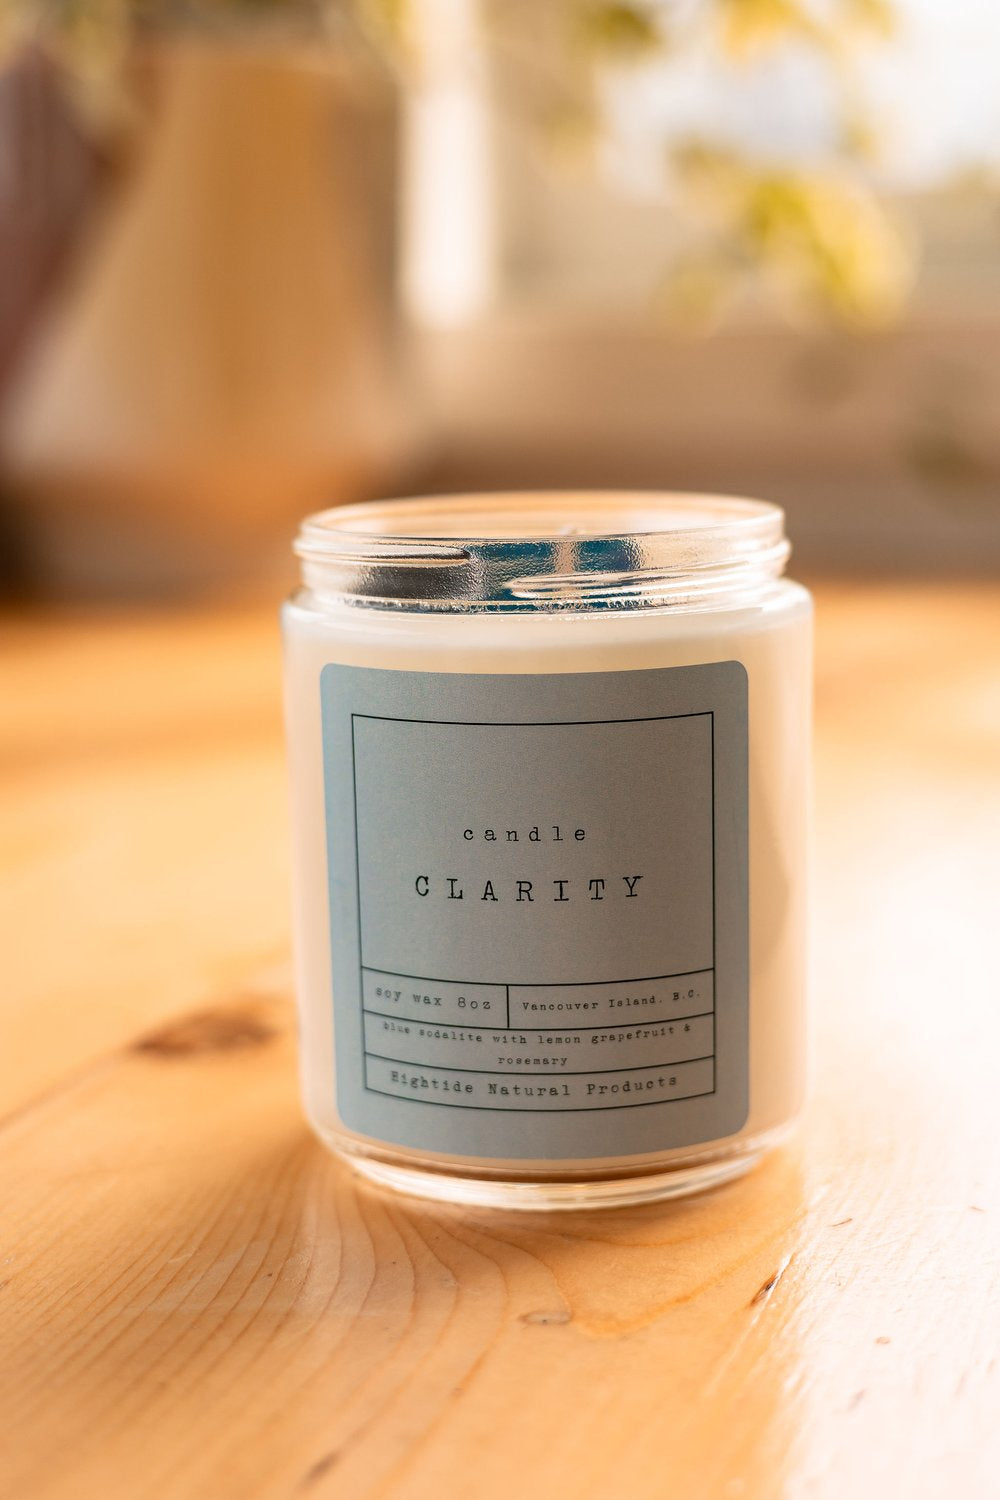 Hightide Designs - 8oz Nautral Soy Wax Candle